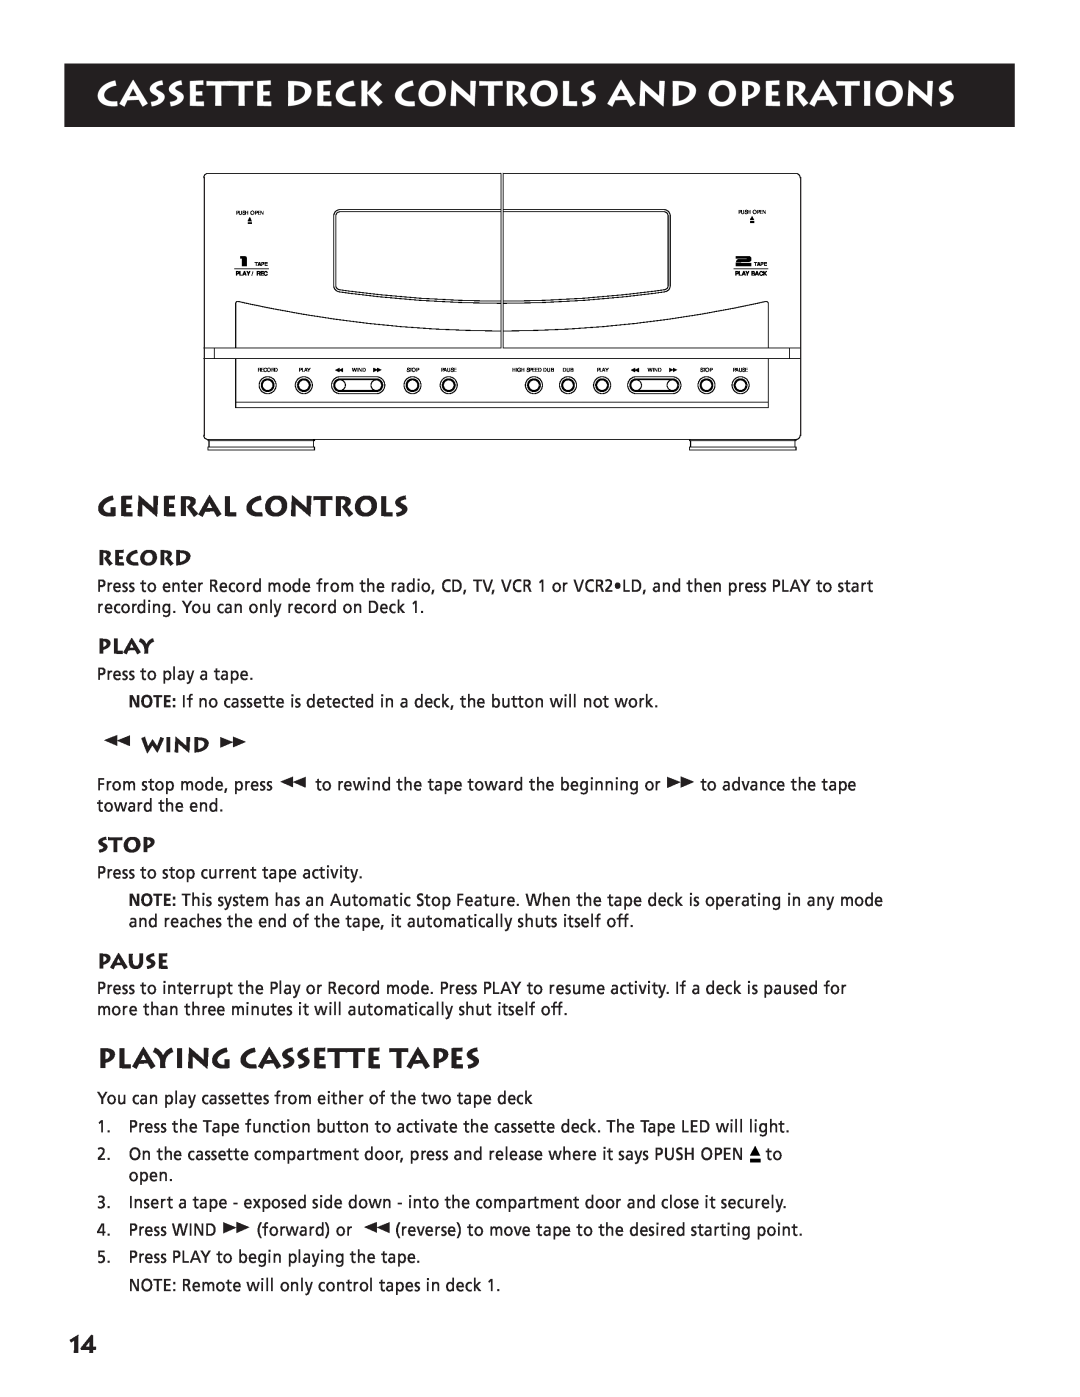 RCA RP-9380 manual Cassette Deck Controls And Operations, Playing Cassette Tapes, General Controls 